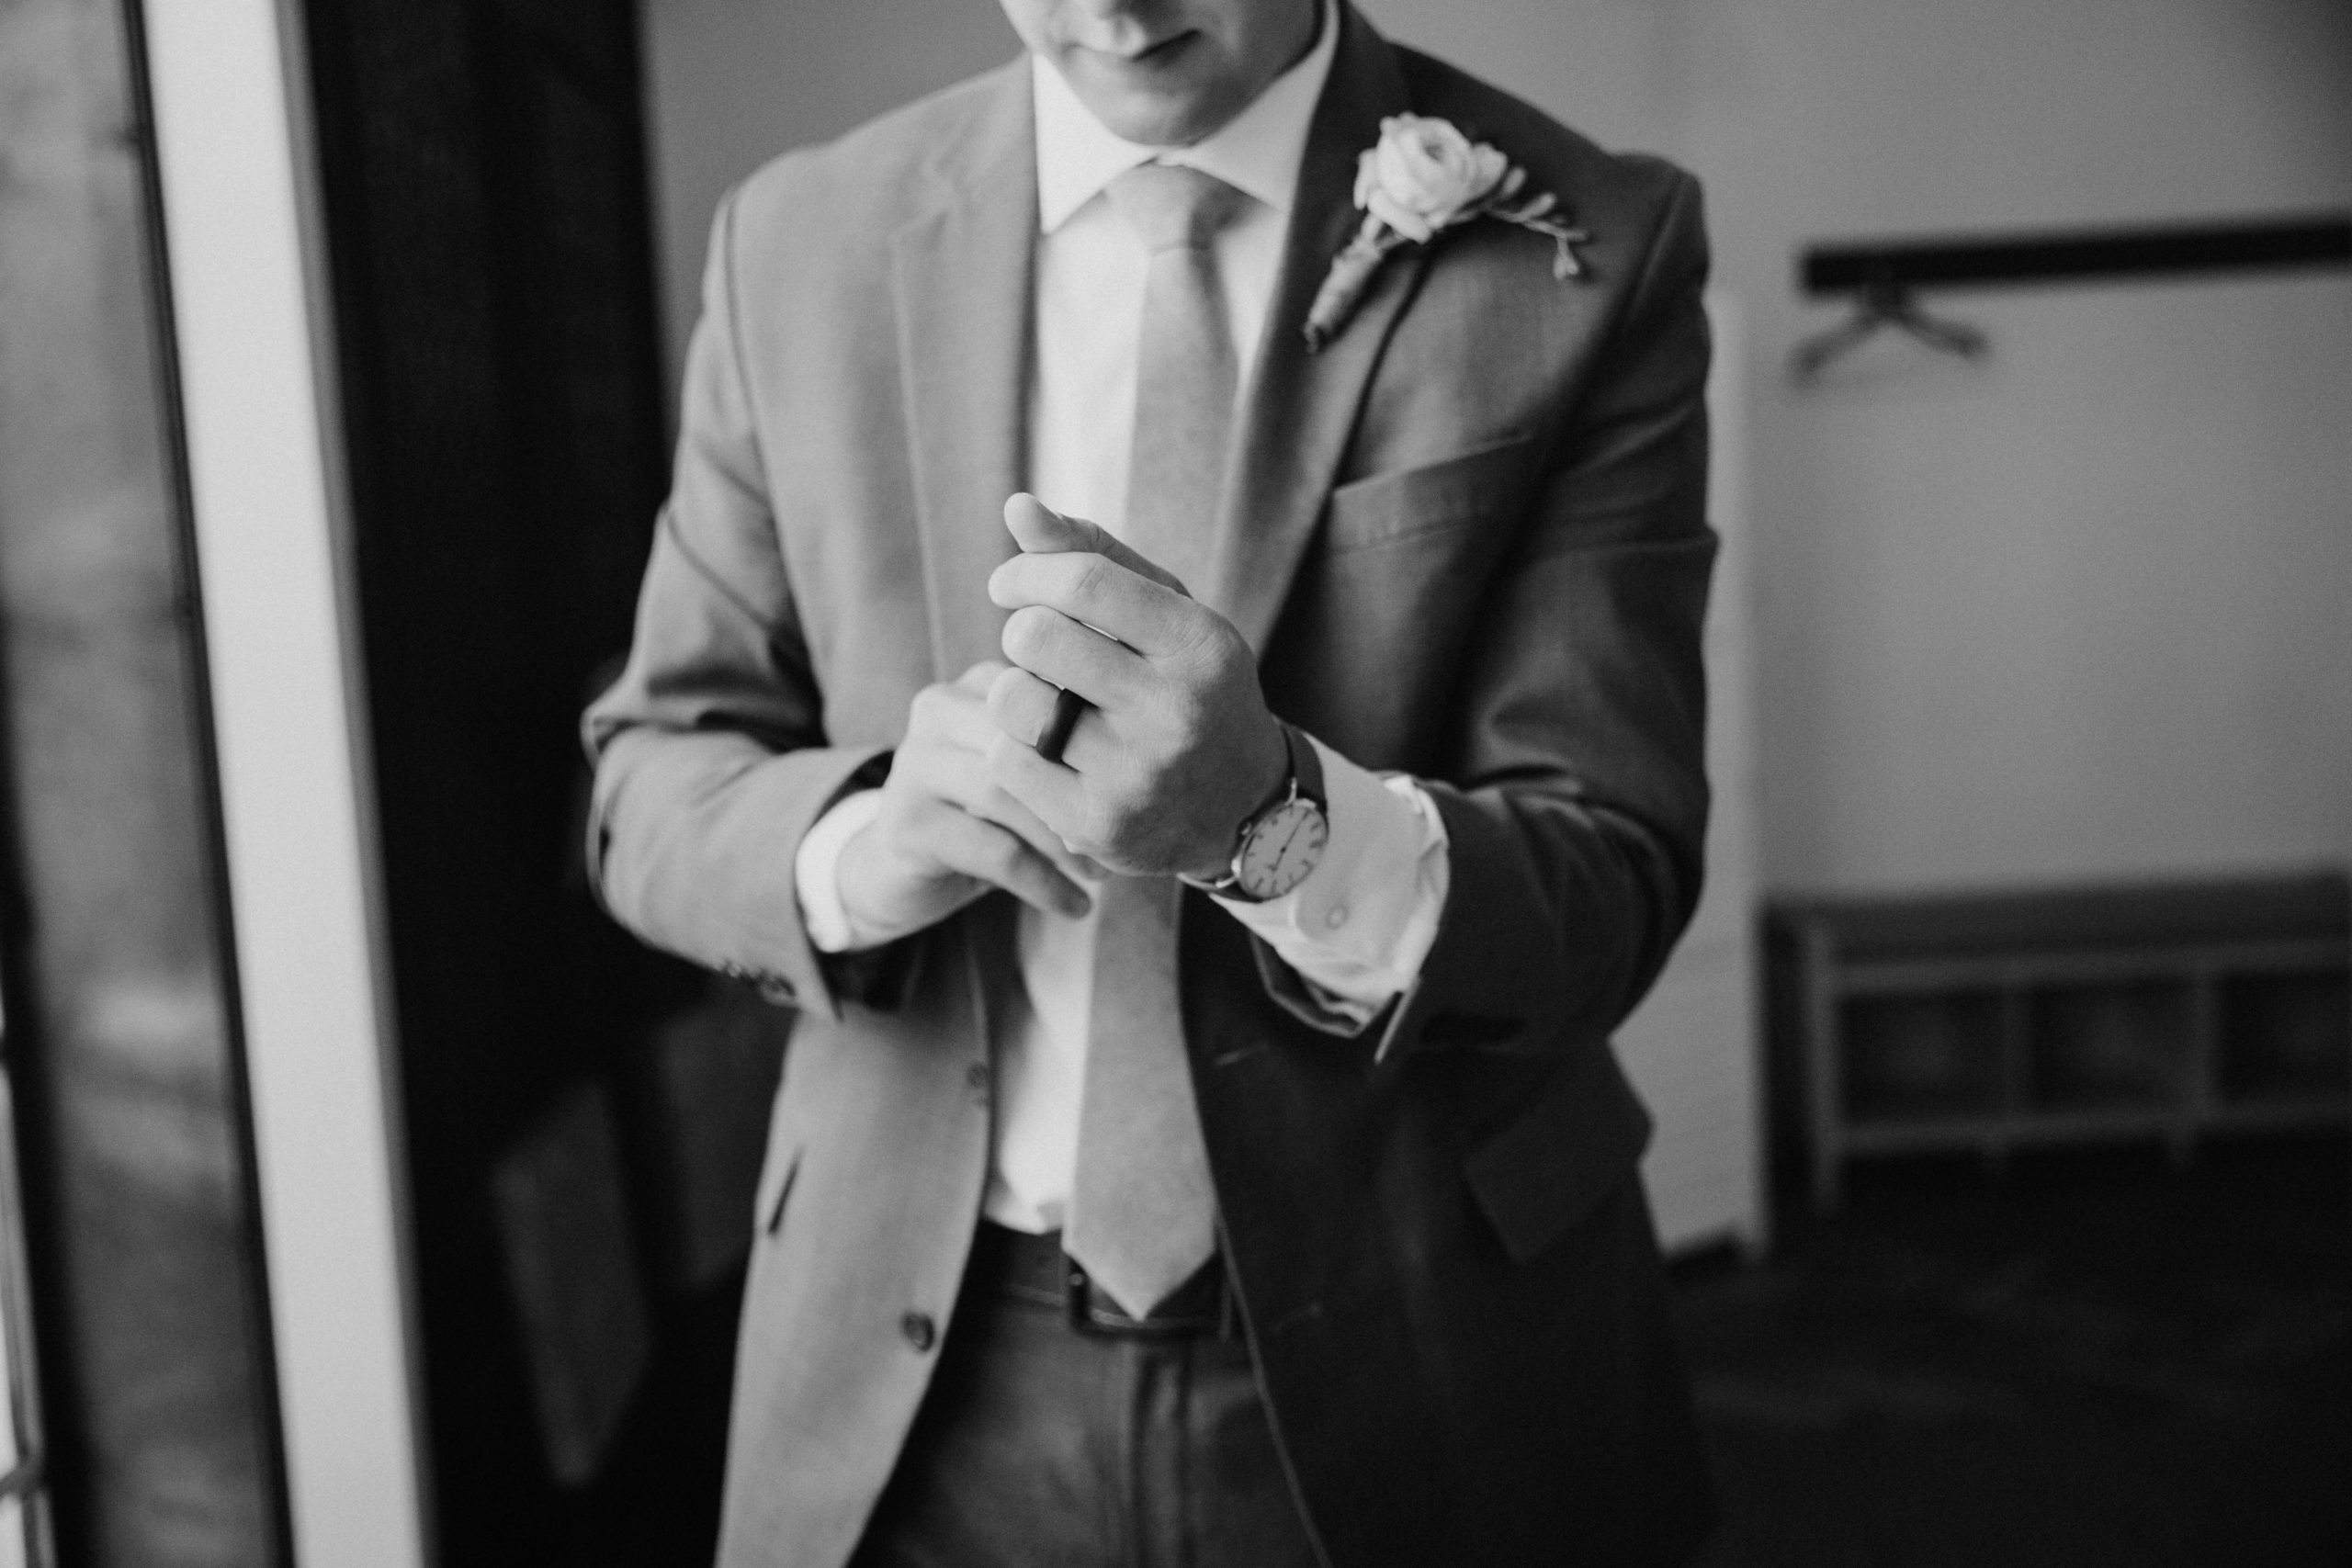 Black and white image of groom adjusting his cufflinks while getting ready on his wedding day taken by Phoenix wedding photographer, Kaylie Miller.